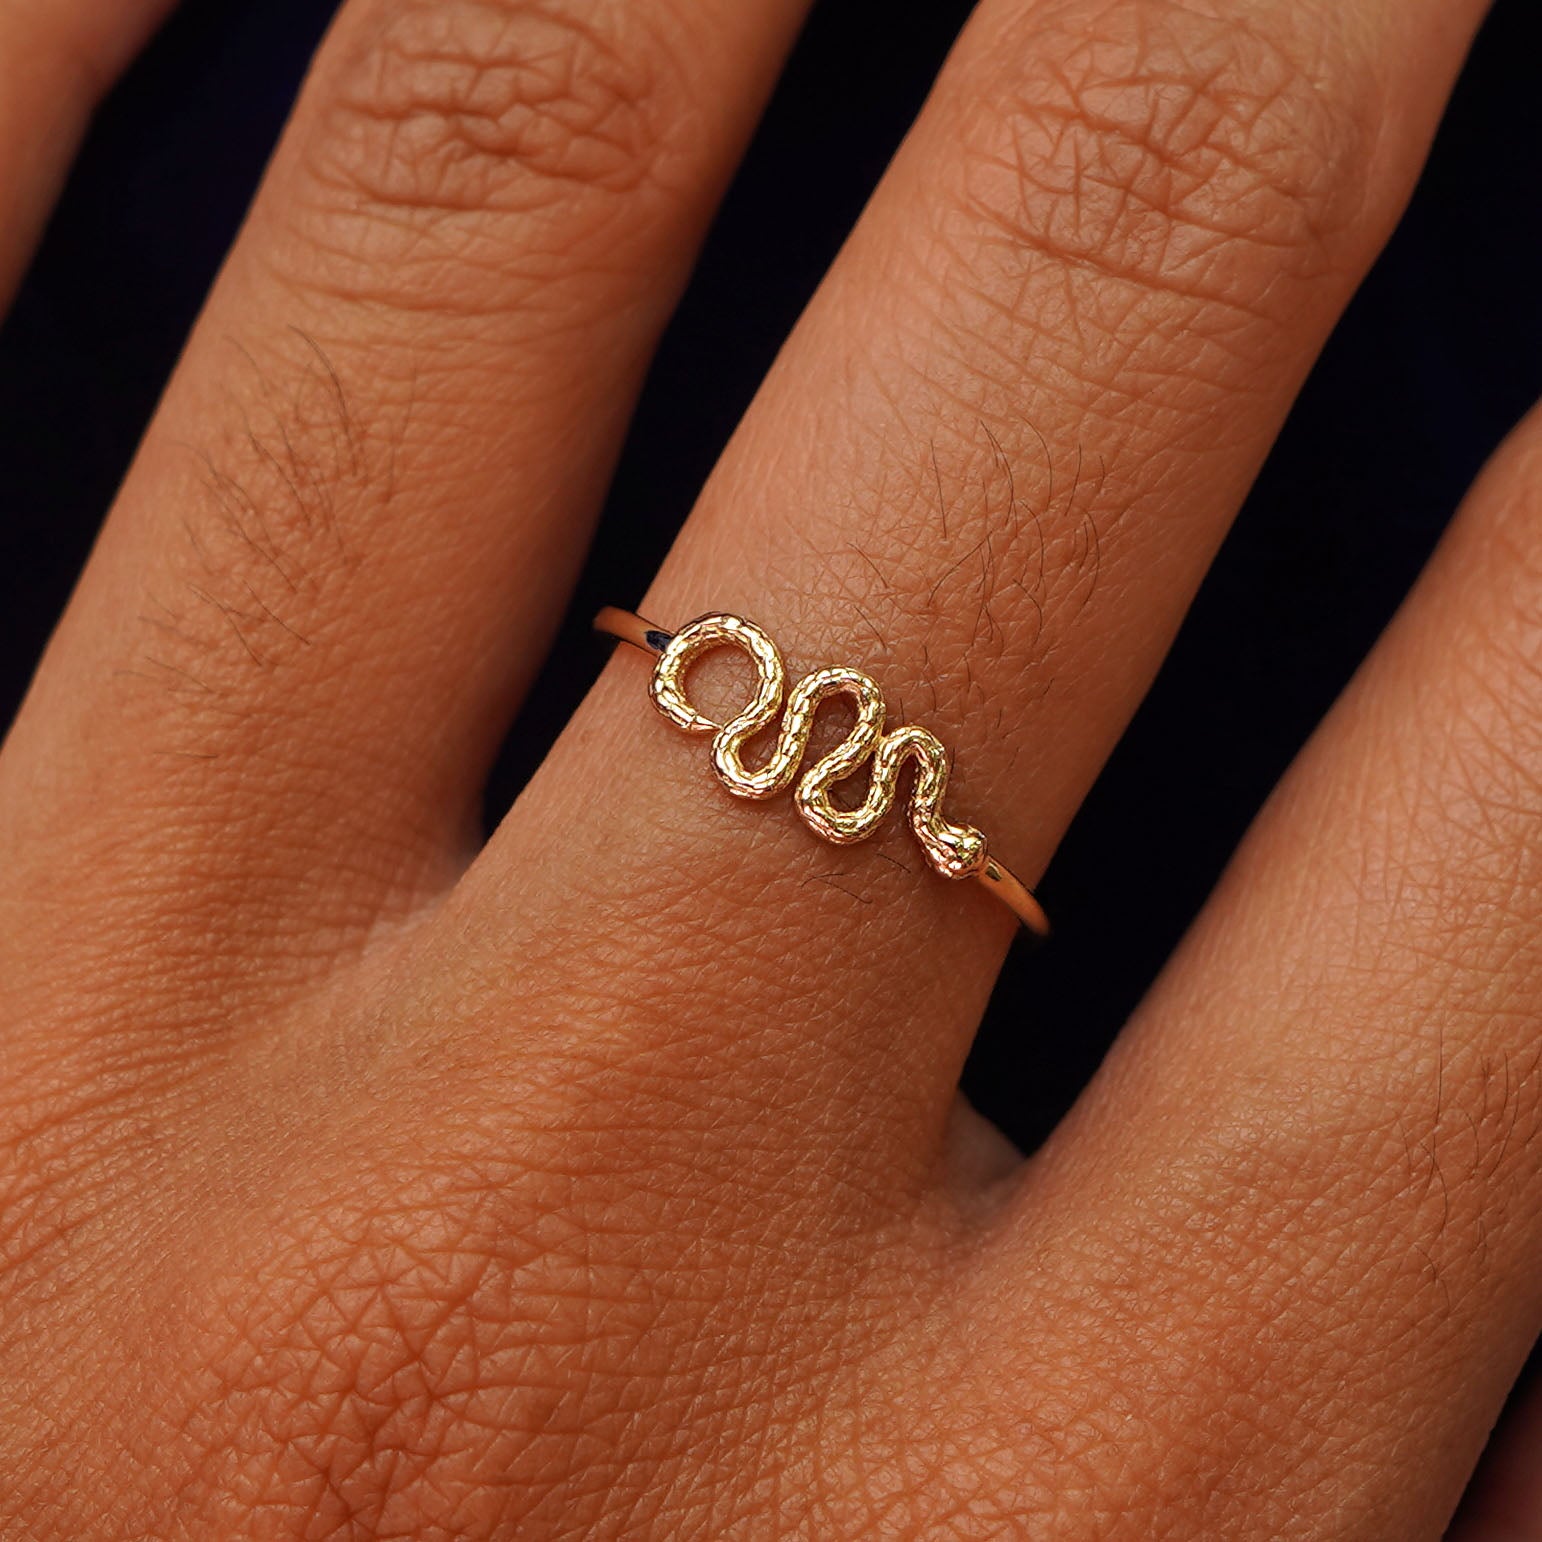 Close up view of a model's hand wearing a yellow gold Snake Ring